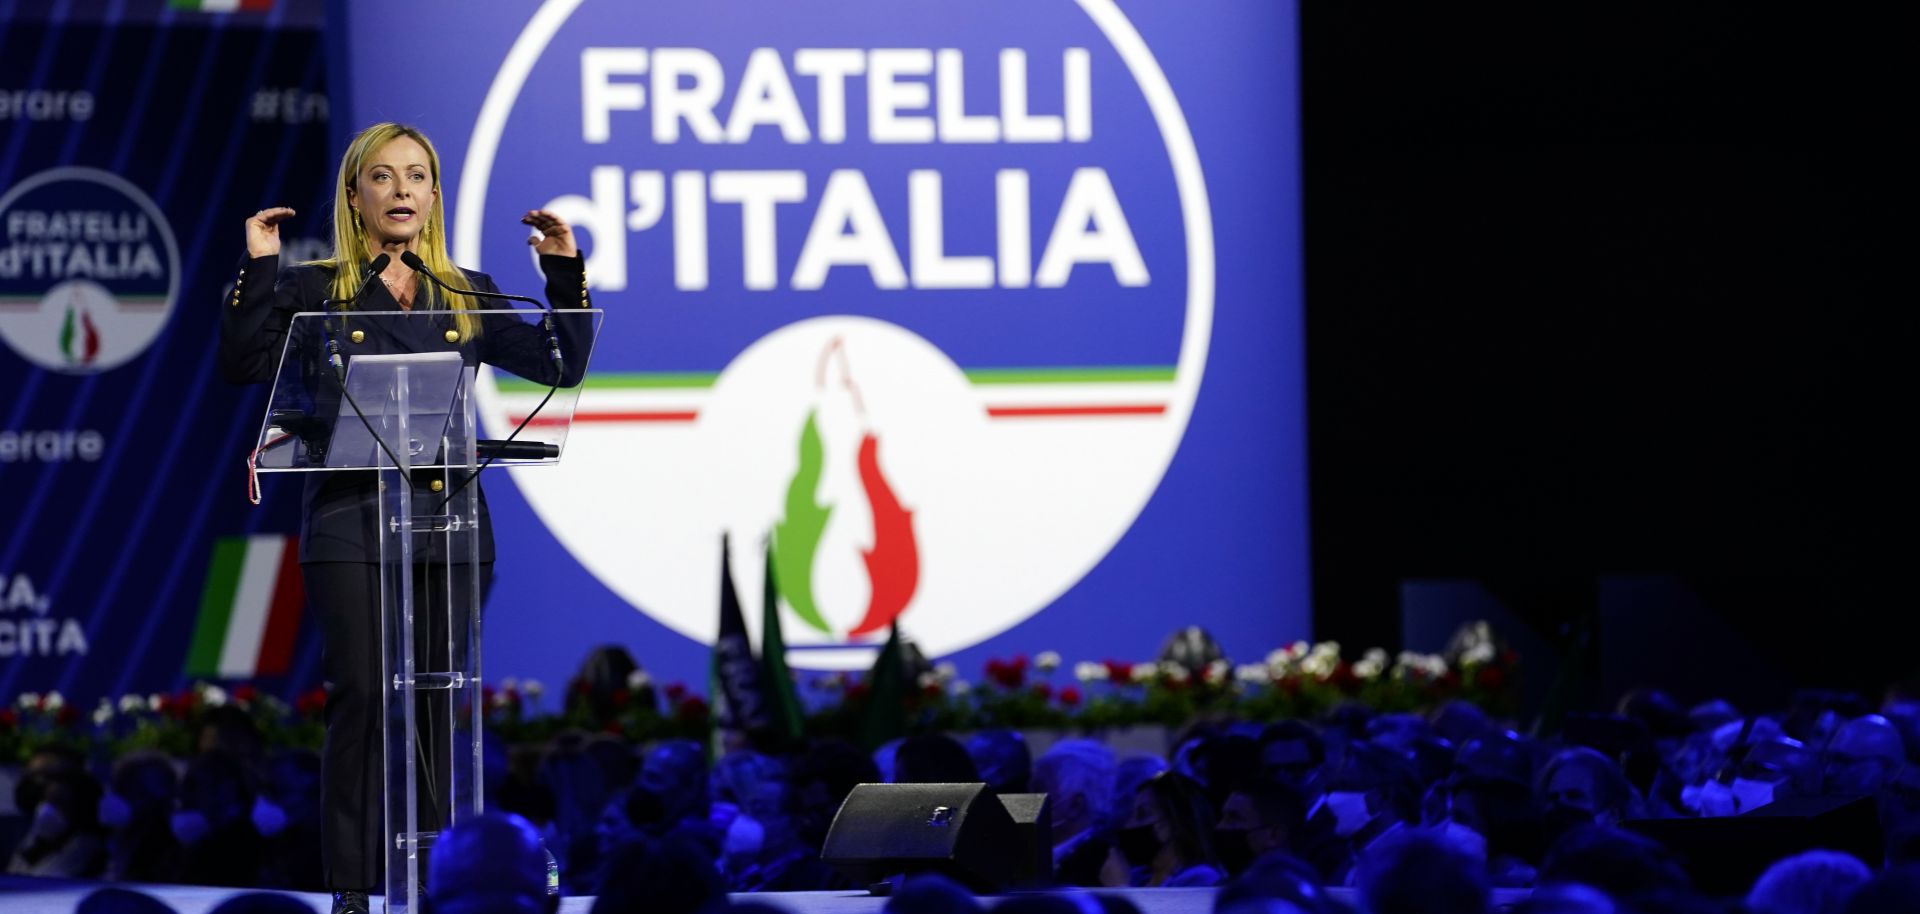 Giorgia Meloni, the leader of the right-wing Brothers of Italy party, gives a speech at a political rally in Milan, Italy, on April 29, 2022. 